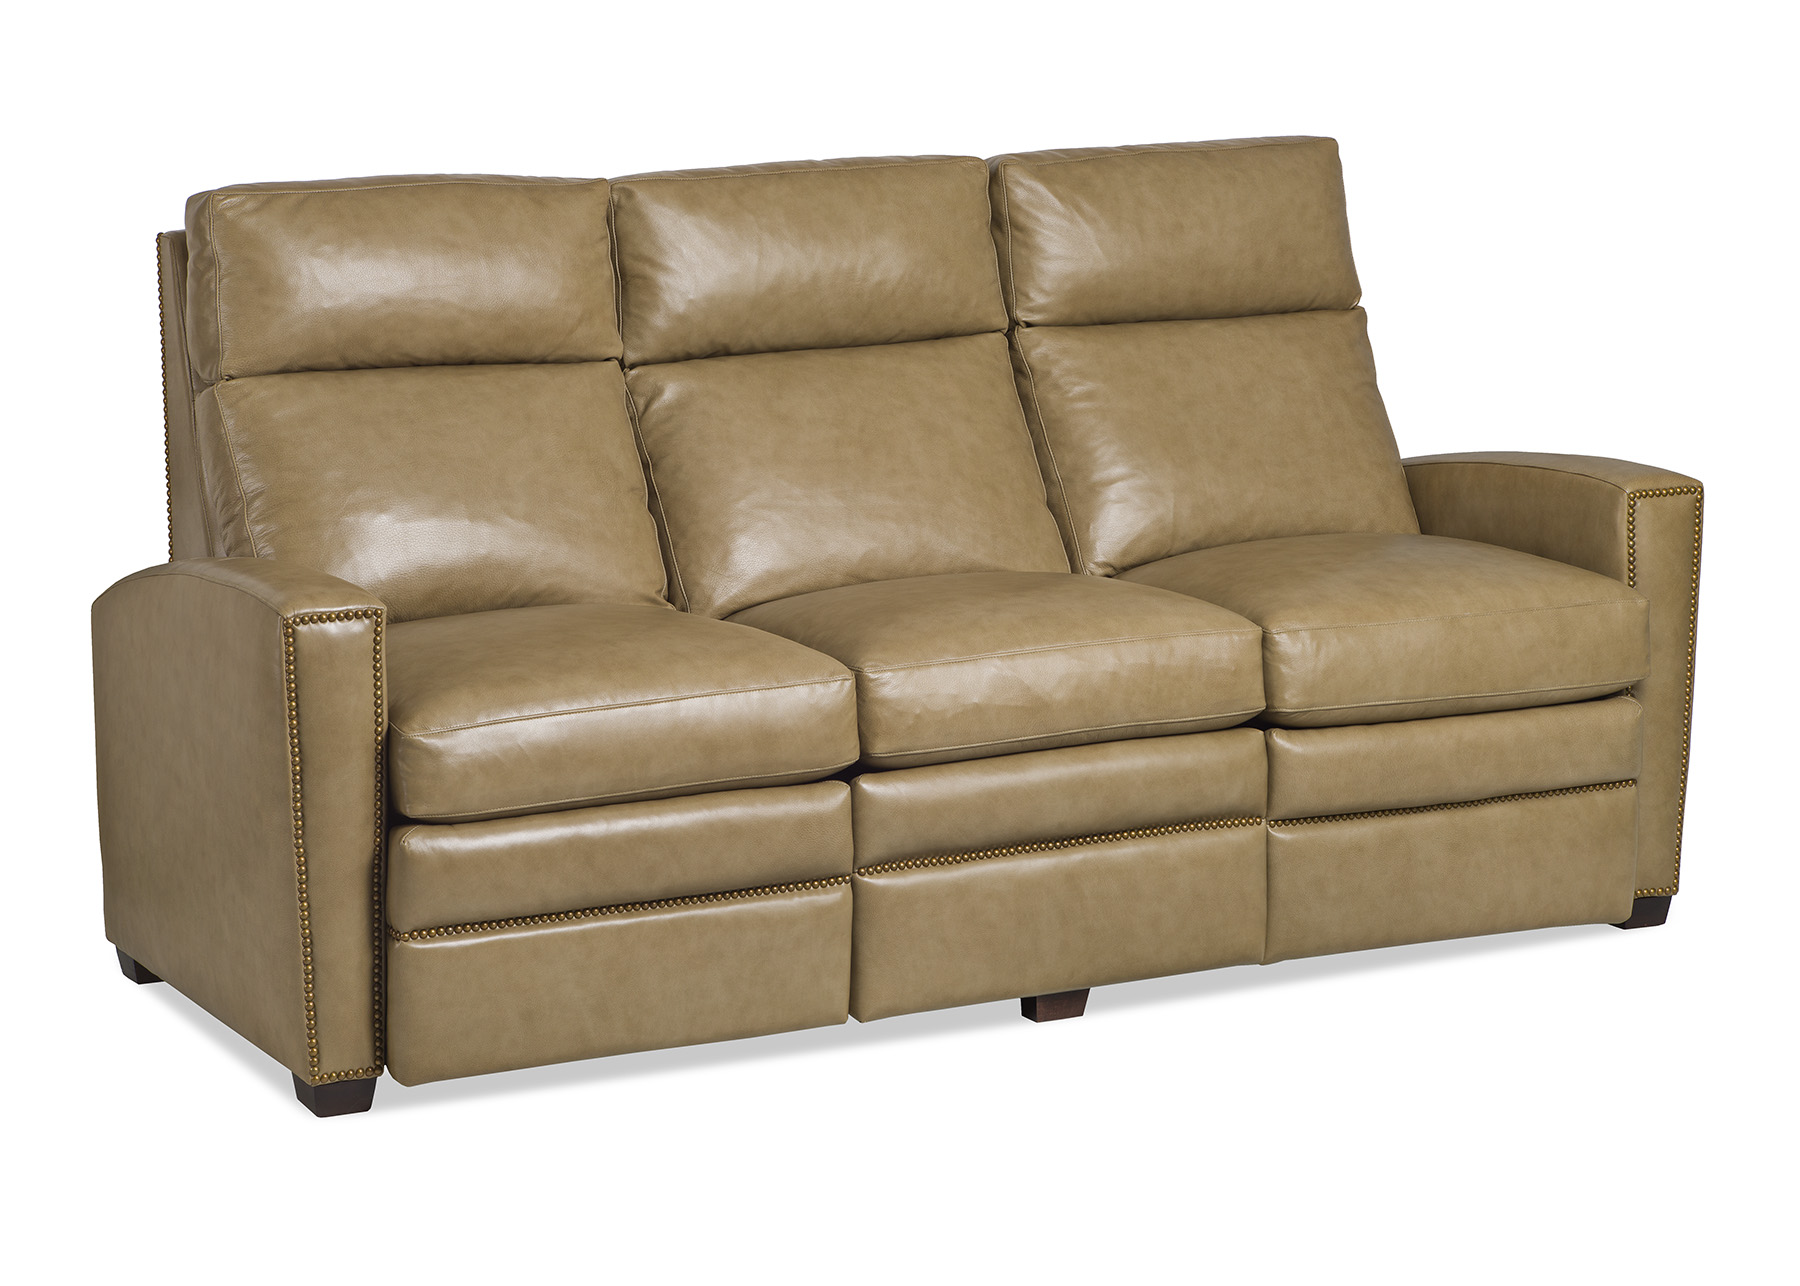 ACCLAIM POWER RECLINER SOFA-(2) RECLINERS